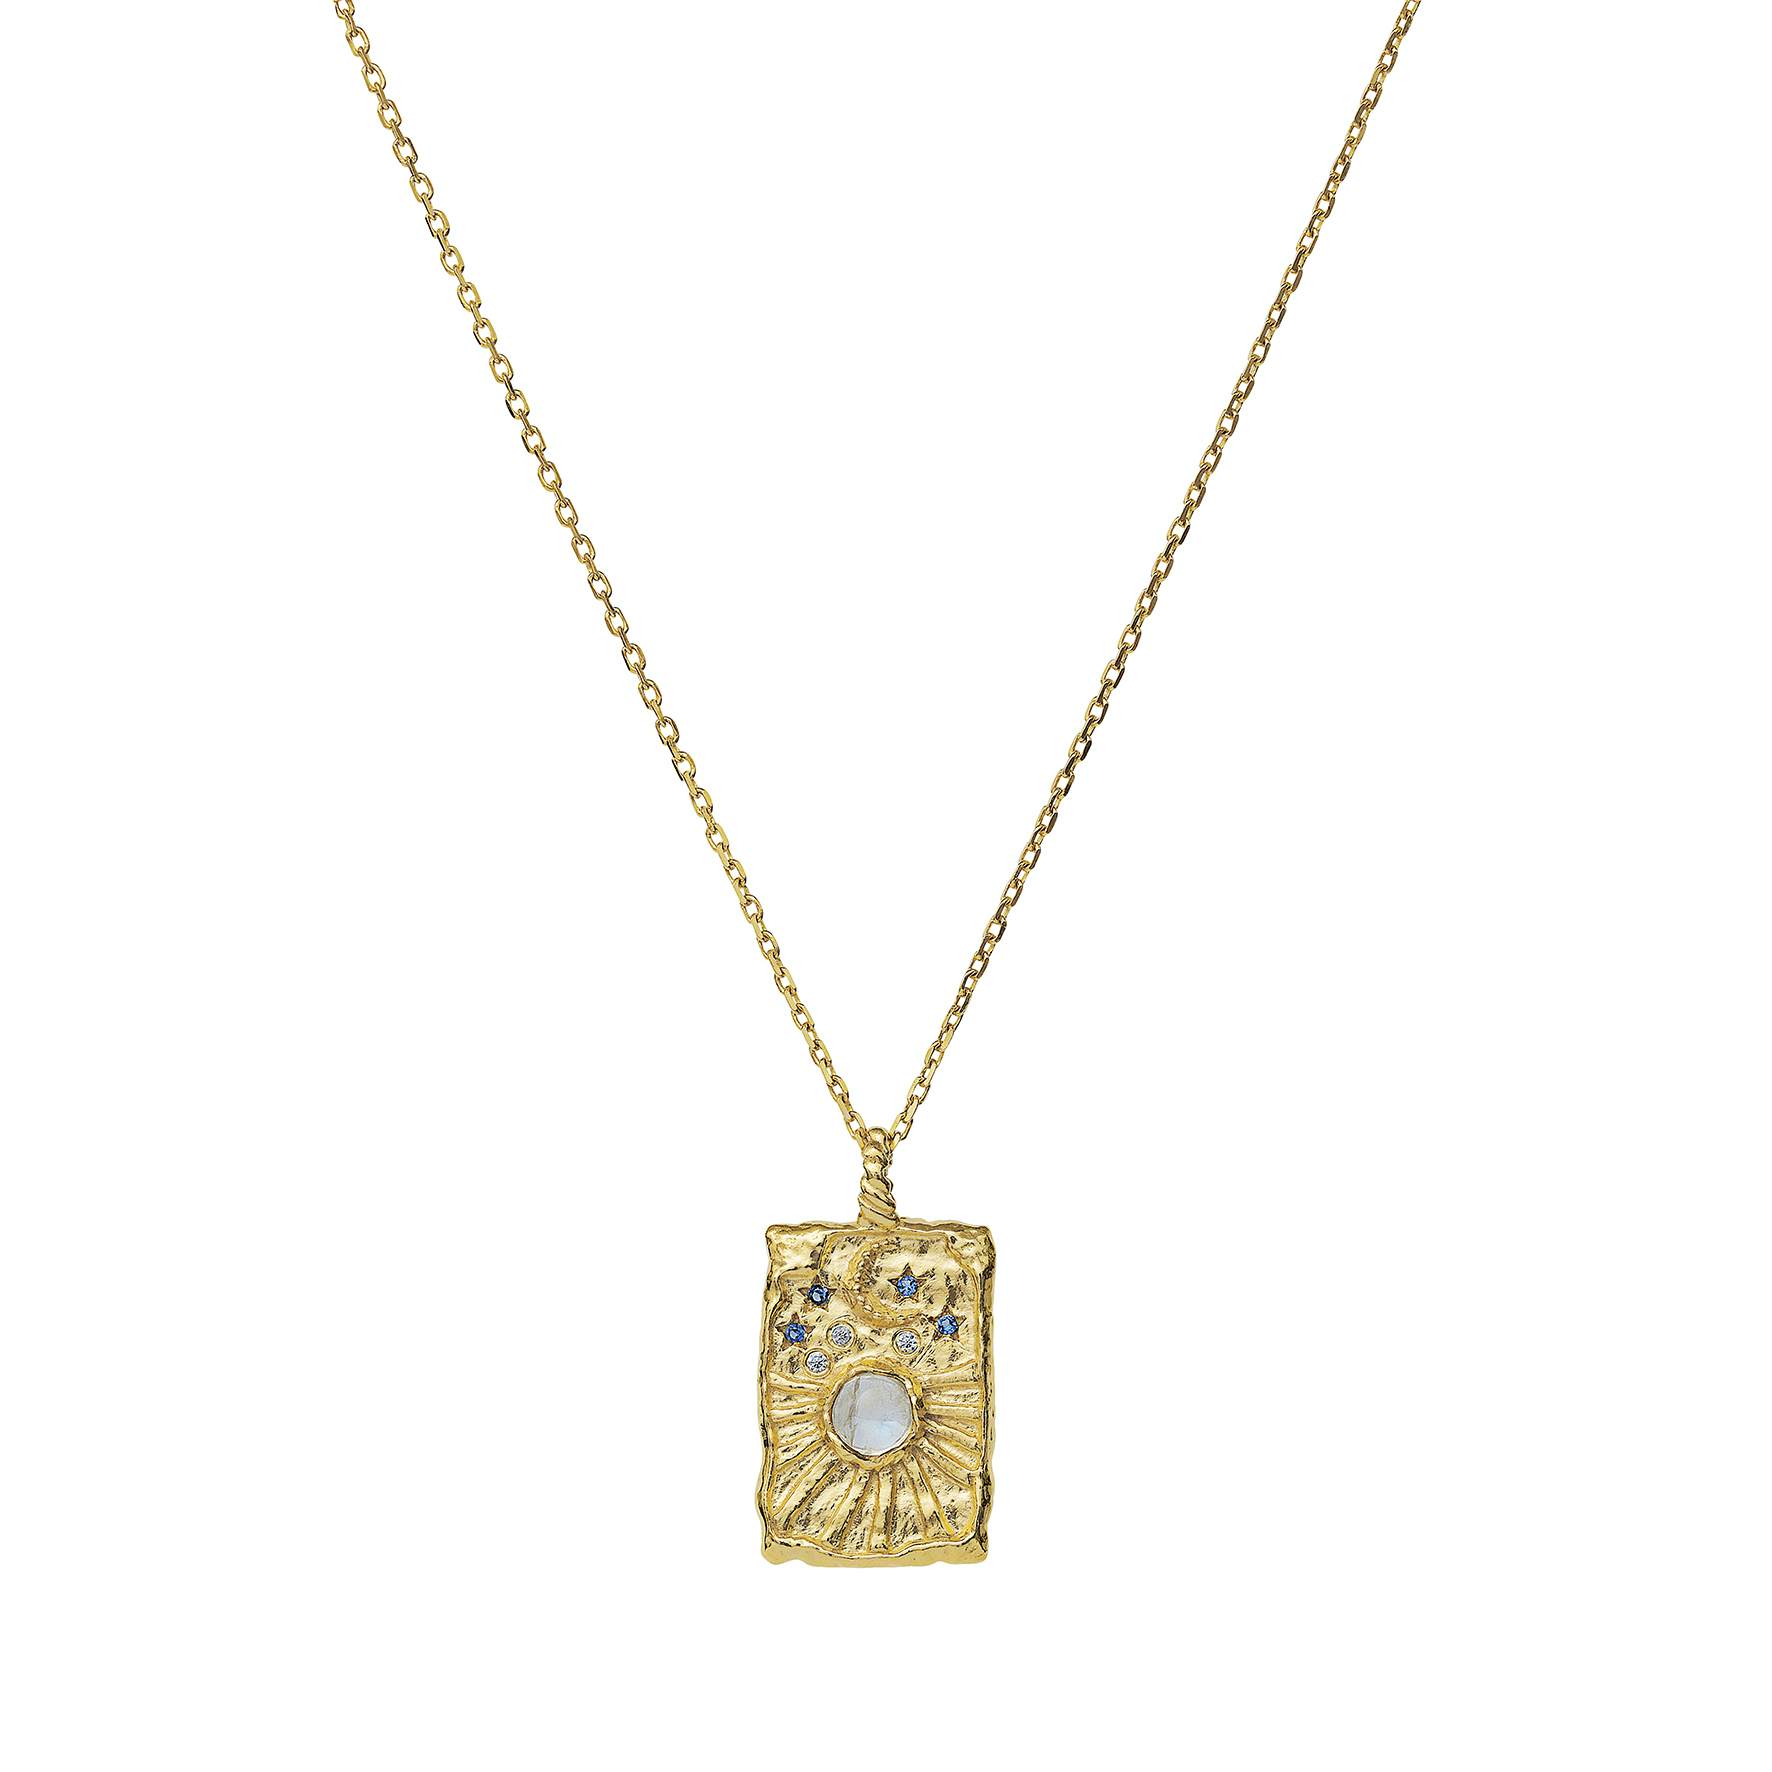 Aylin Necklace from Maanesten in Goldplated-Silver Sterling 925